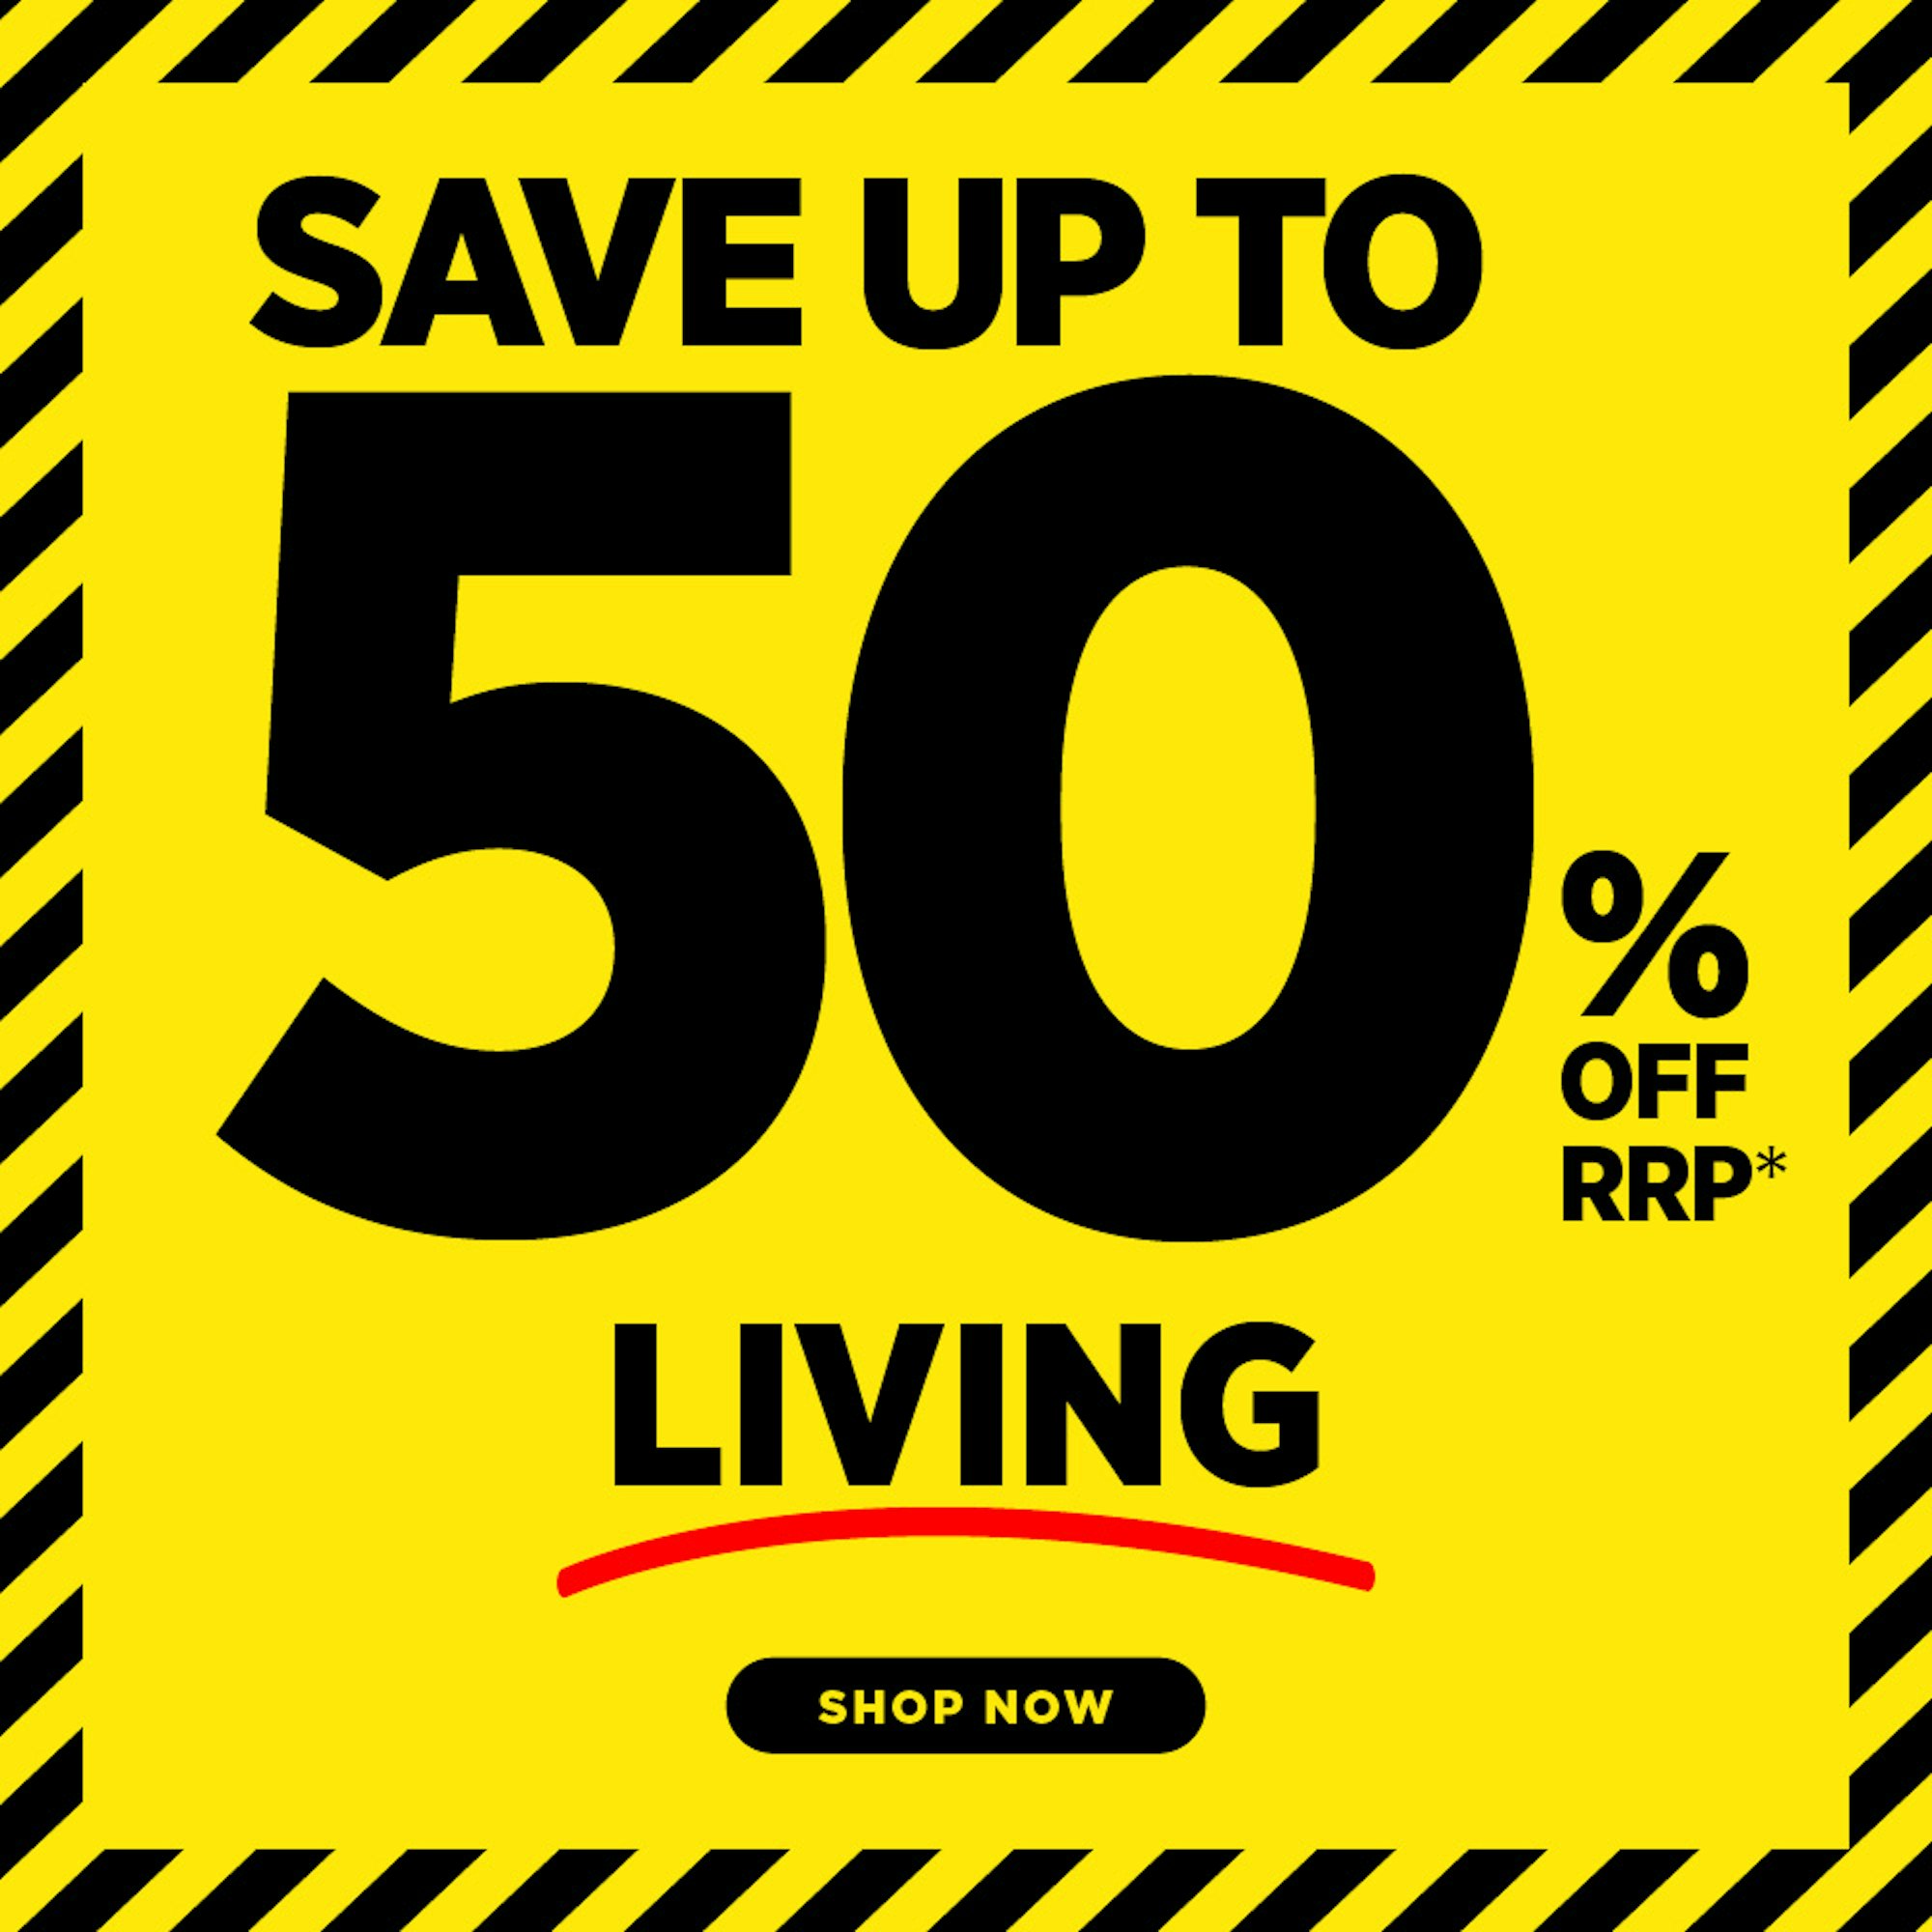 living up to 50% off